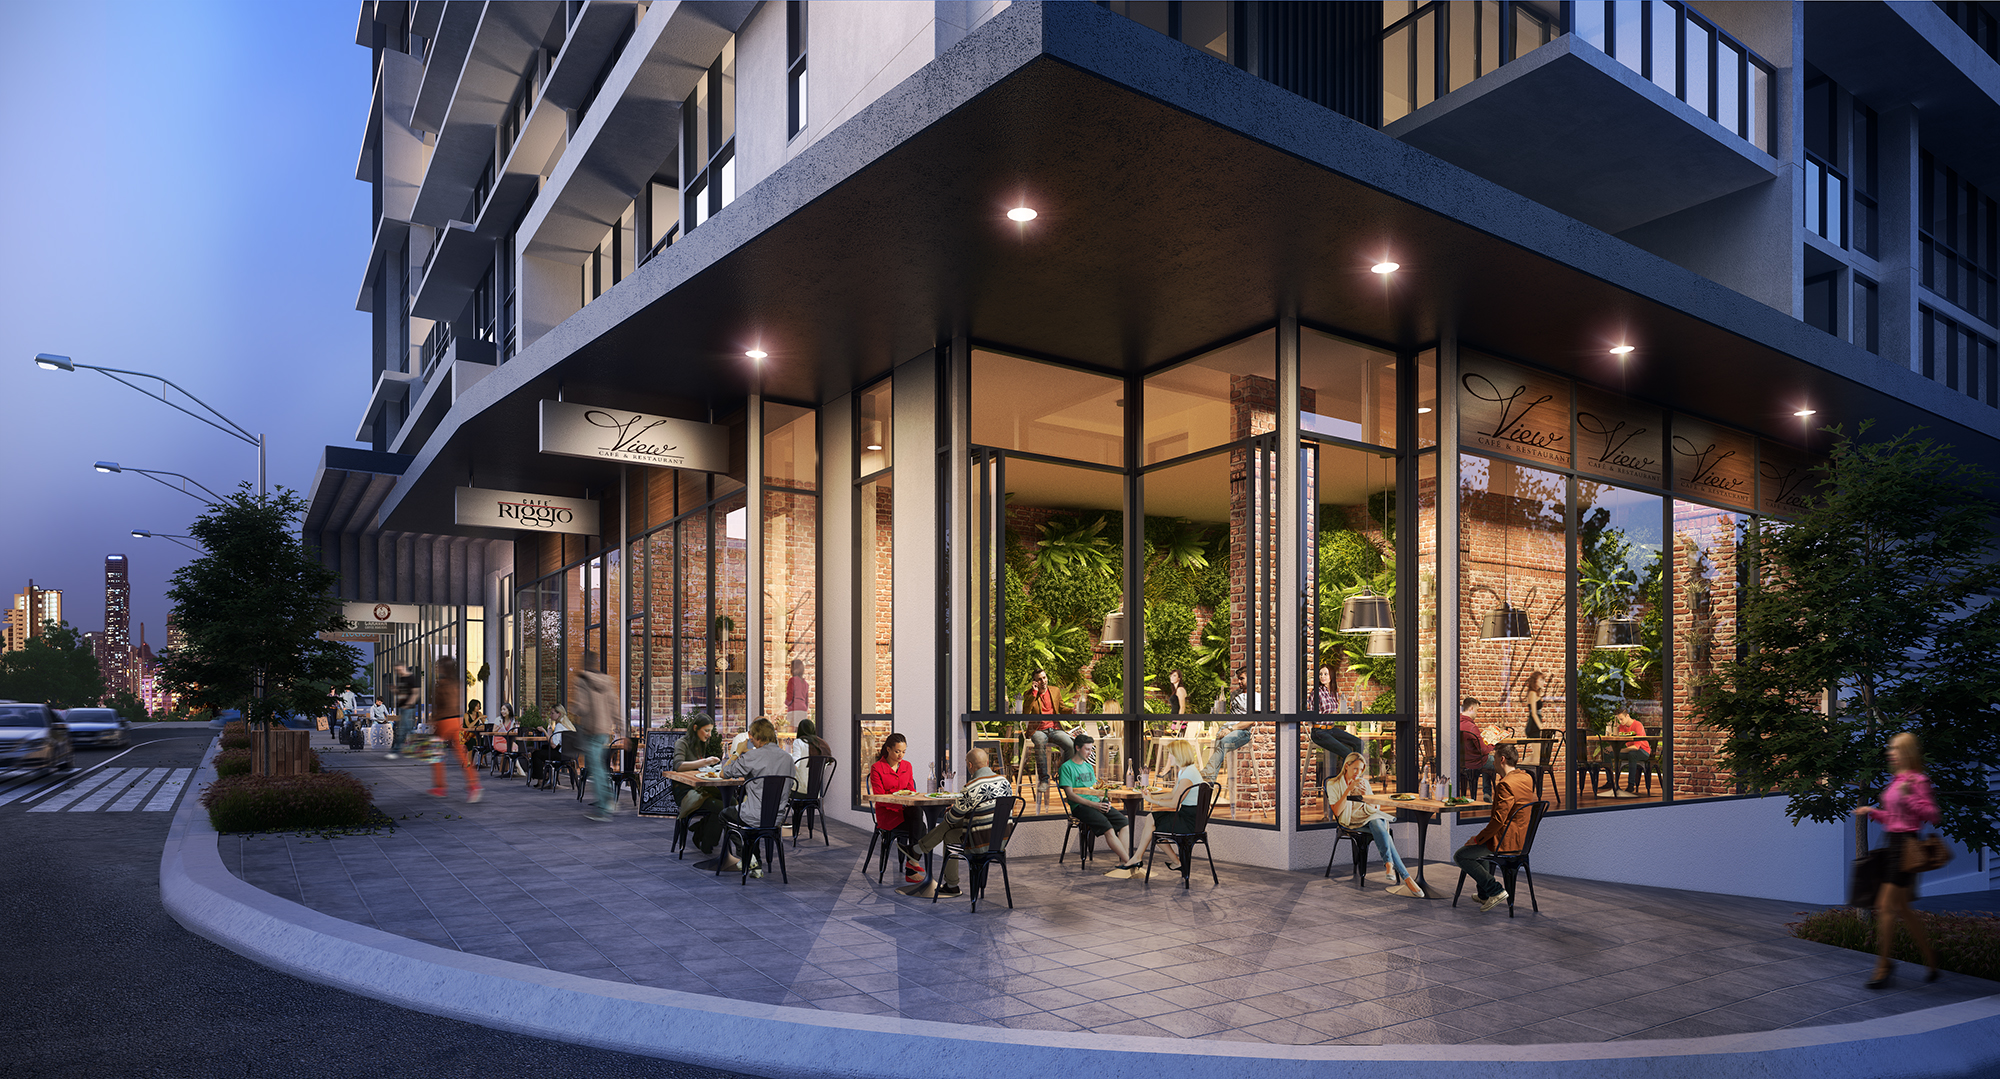 Commercial tenancy at the ground level of an apartment building, featuring brick interior finishes, floor-to-ceiling glazing, and outdoor seating area with bustling activity.